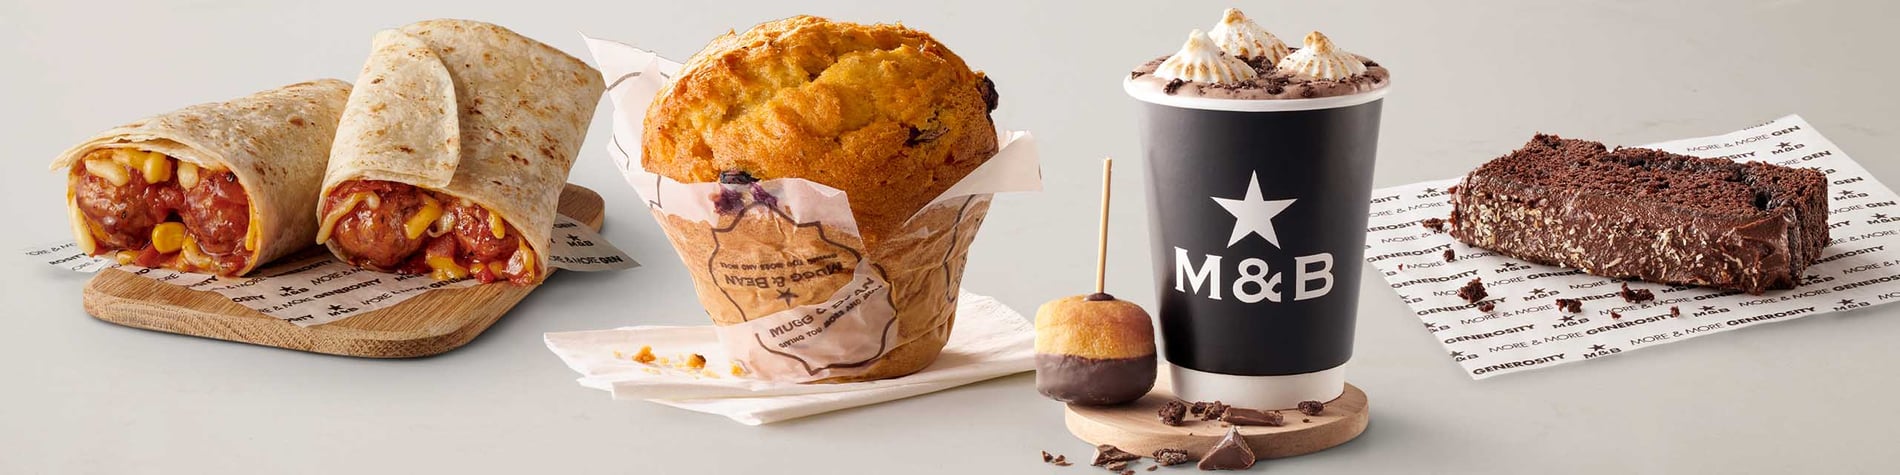 New takeaway meals from Mugg & Bean On-The-Move including a Marshmallow Cookies & Cream Hot Chocolate, a Swedish Meatball Wrap with pork meatballs, a slice of Coconut Chocolate Loaf Cake, and a freshly baked Blueberry Giant Muffin.